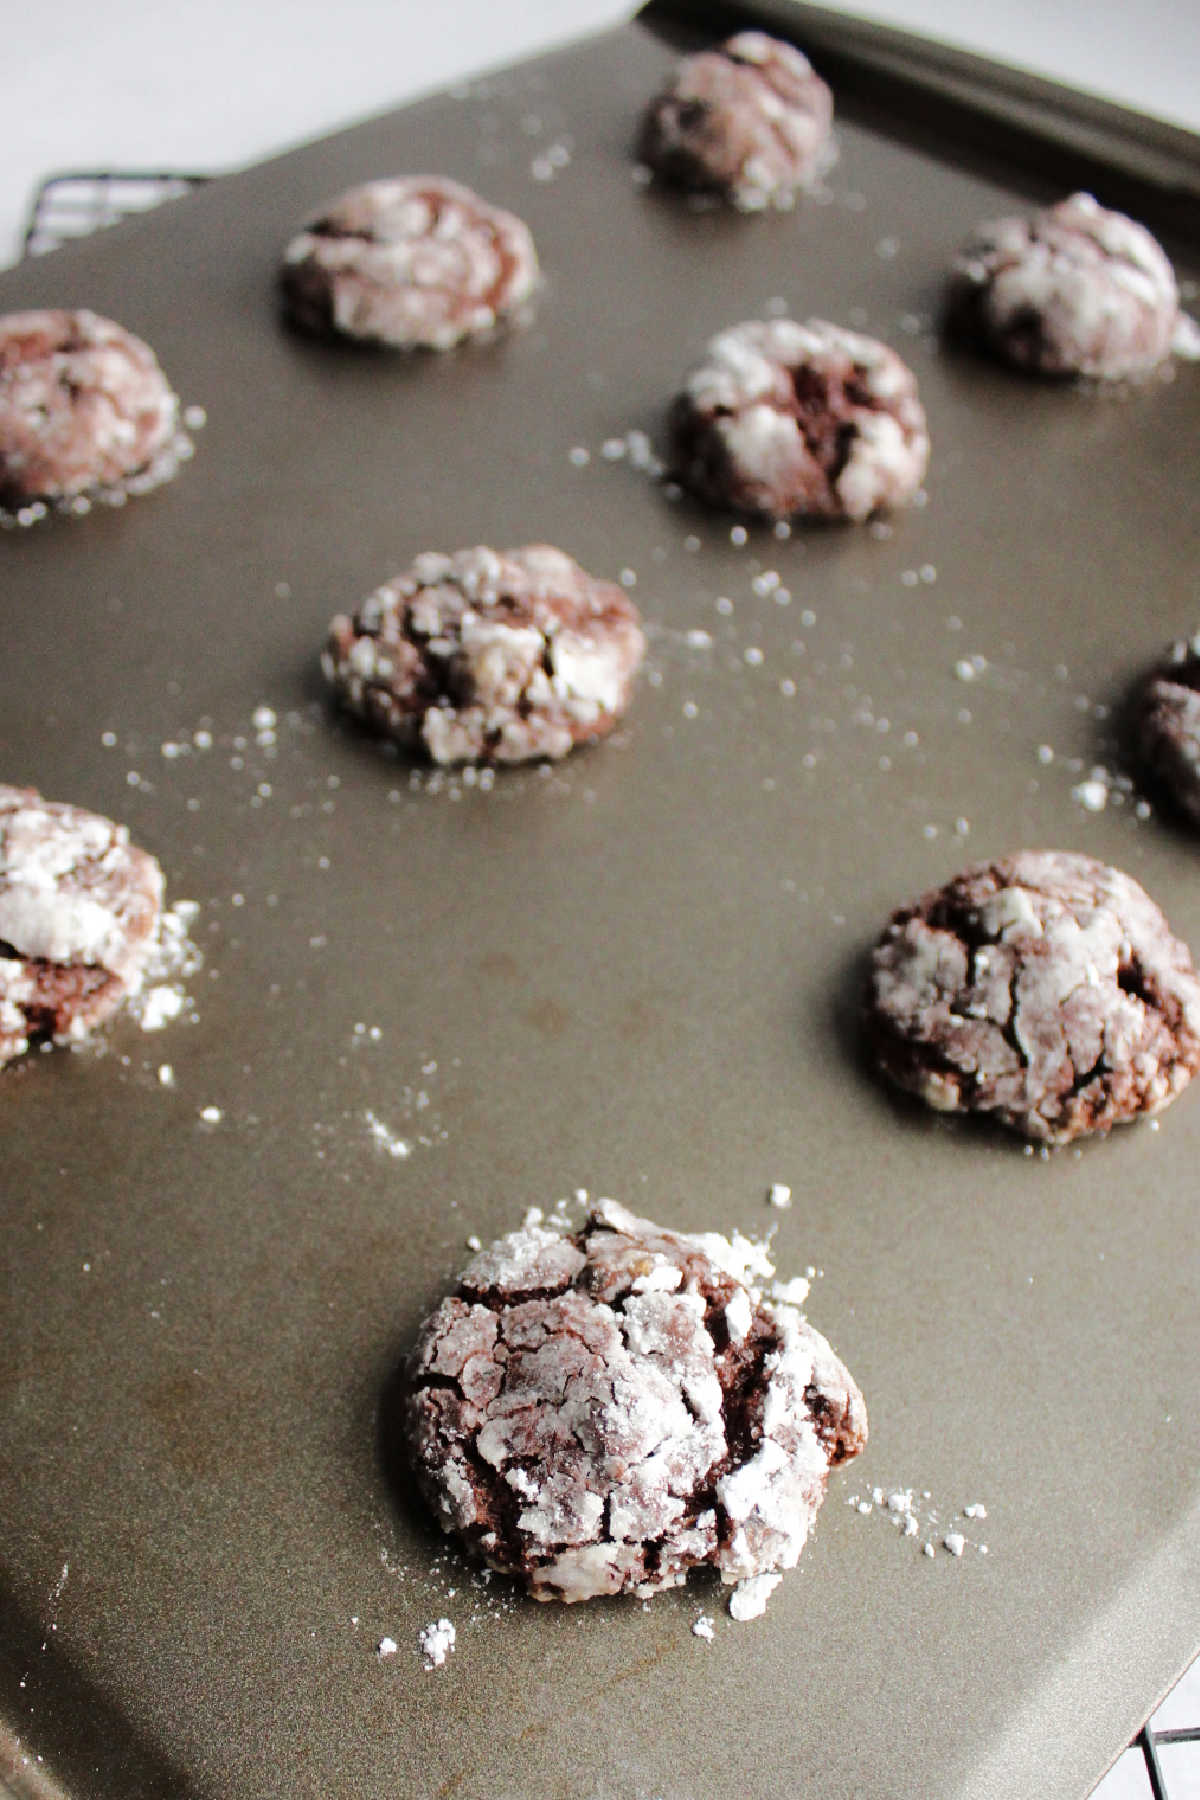 Baked chocolate gooey butter cookies fresh from the oven with crackly powdered sugar exterior showing rich chocolate interior. 